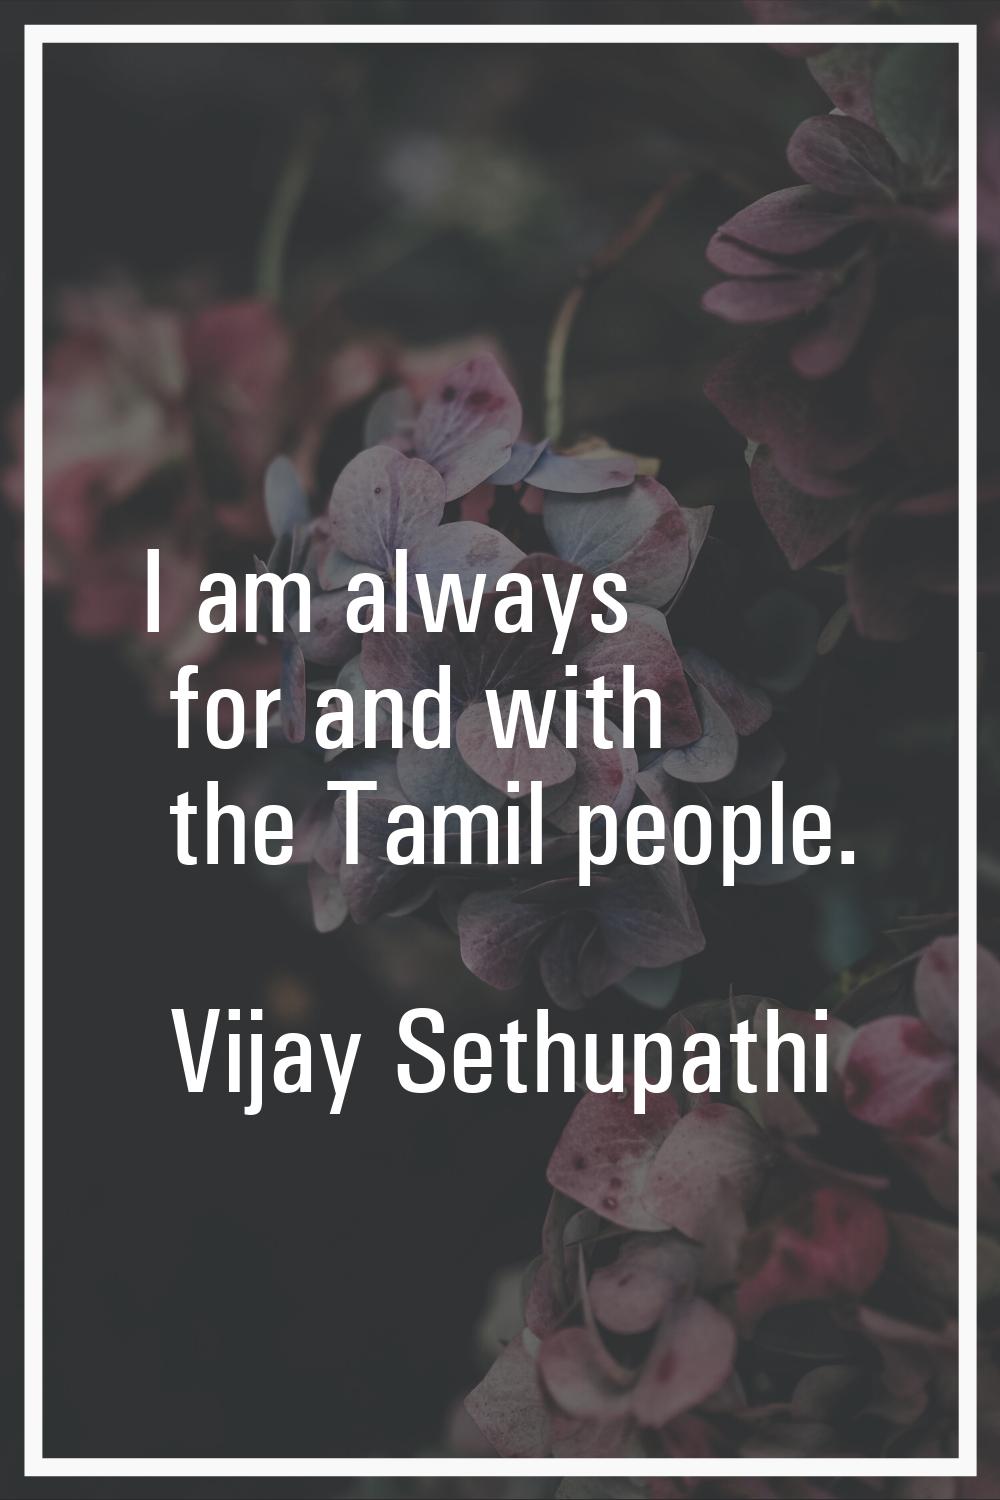 I am always for and with the Tamil people.